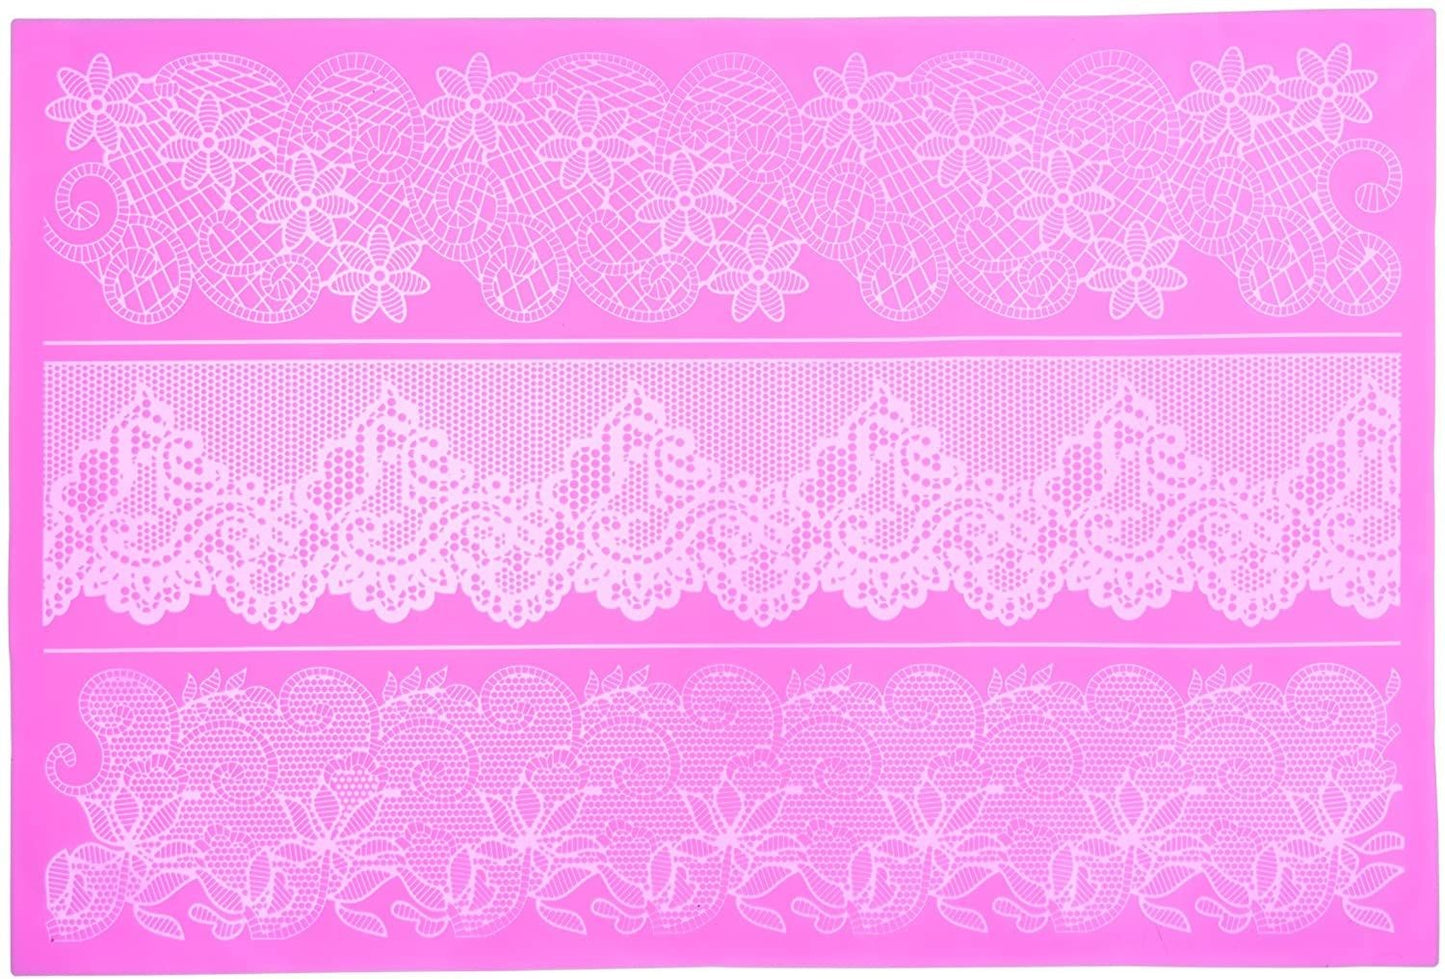 KitchenCraft Sweetly Does It Silicone Large Floral Lace Icing Mould, Pink SDILACEMAT04